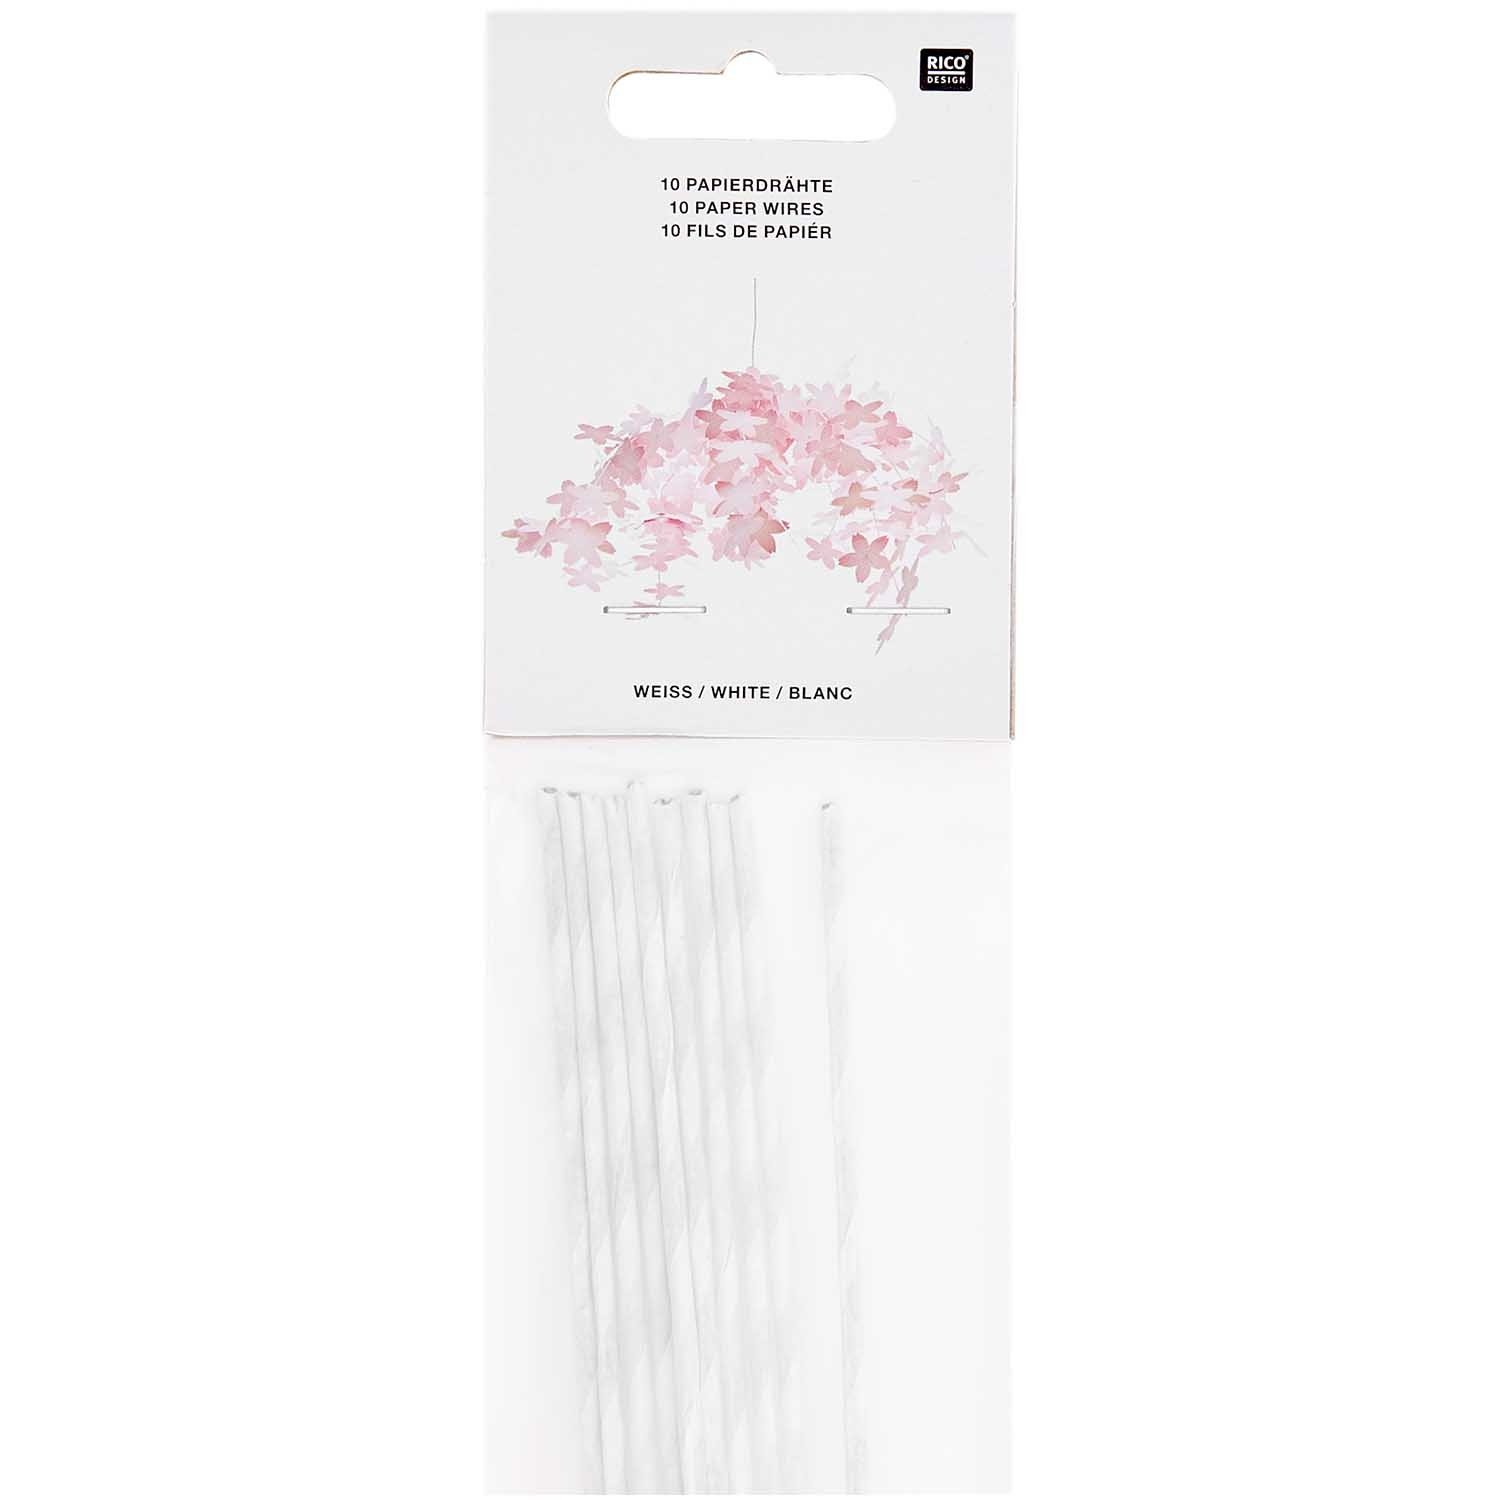 Rico NAY Paper covered wire white, 1m, 10 pcs